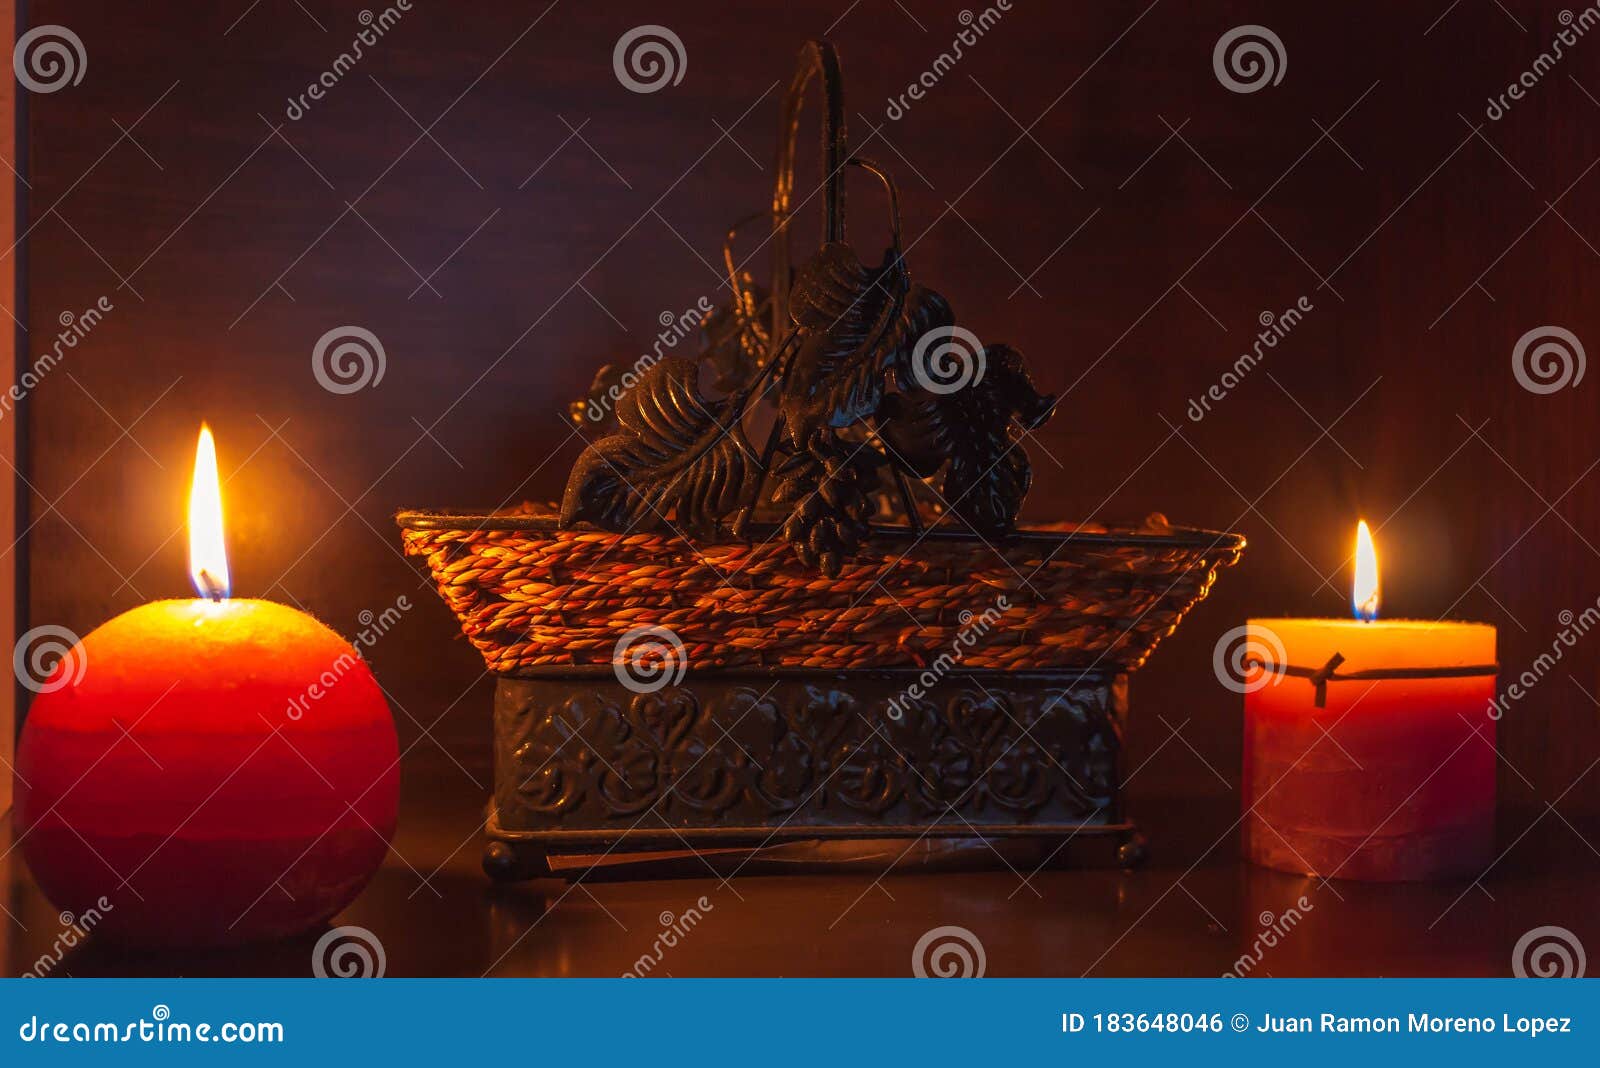 2 lighted candles with a wicker basket behind